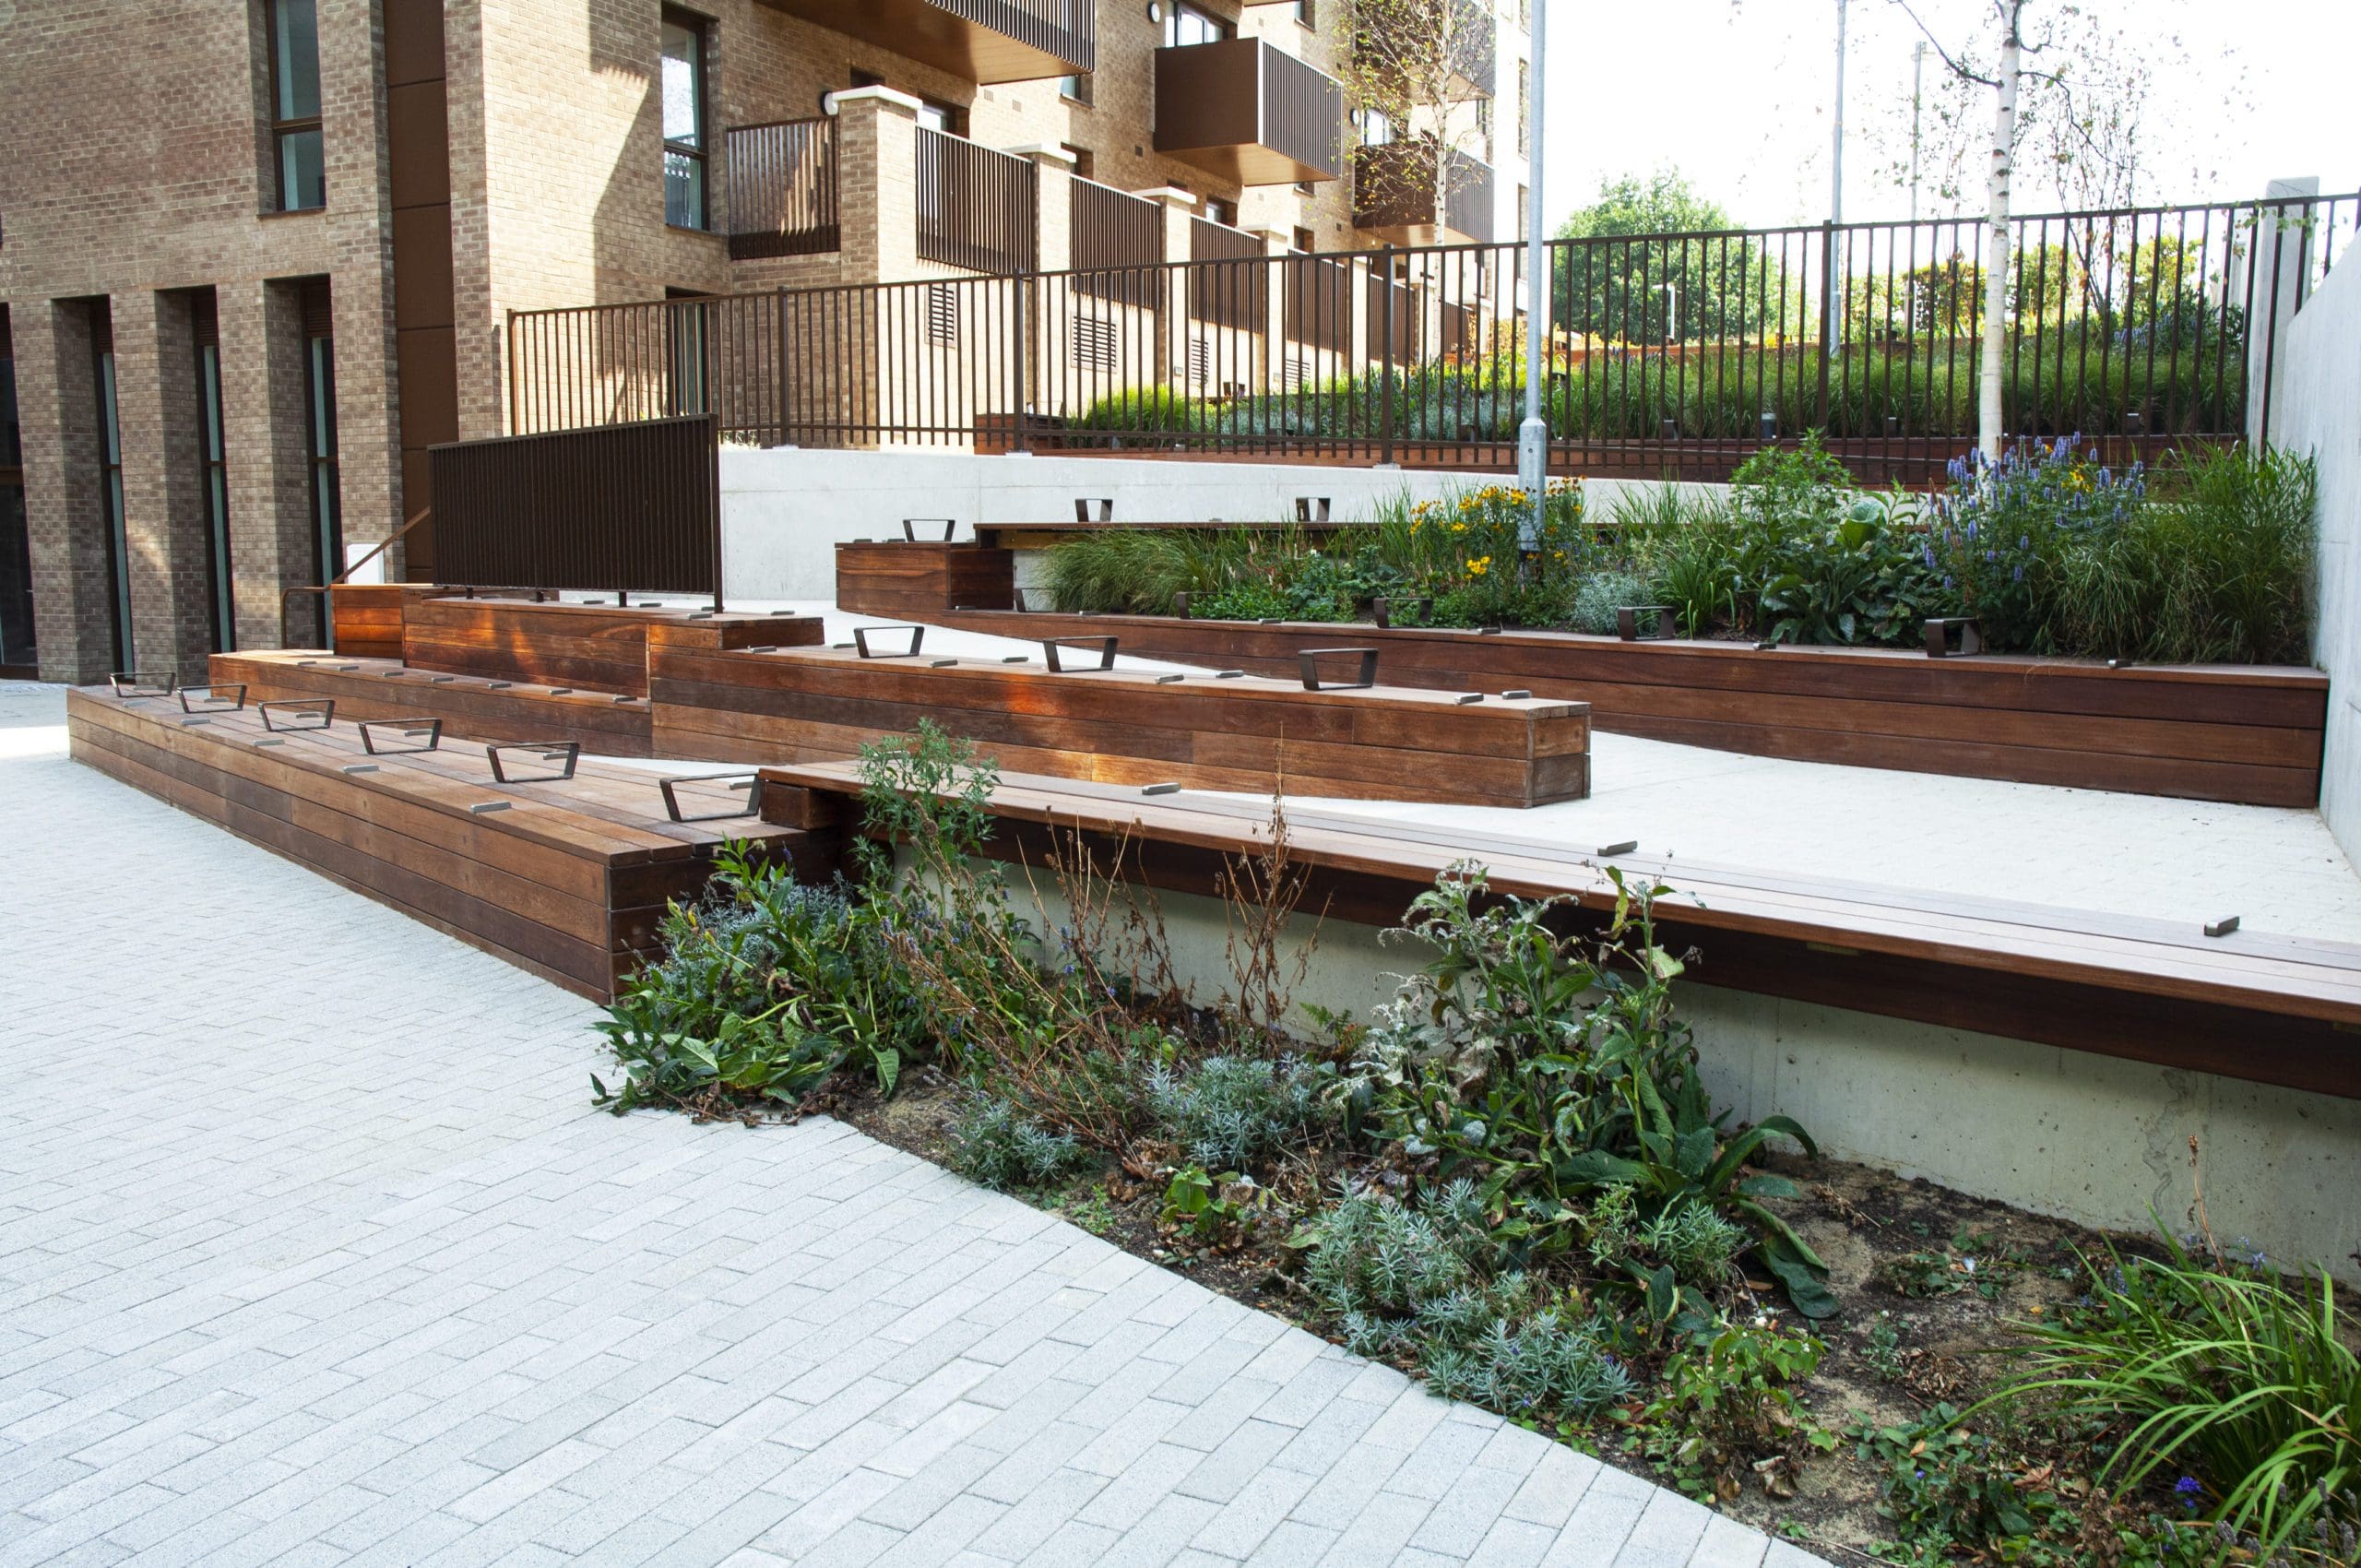 Angled zig zag wooden timber decking creating long bench seating areas and forming up hill pathway